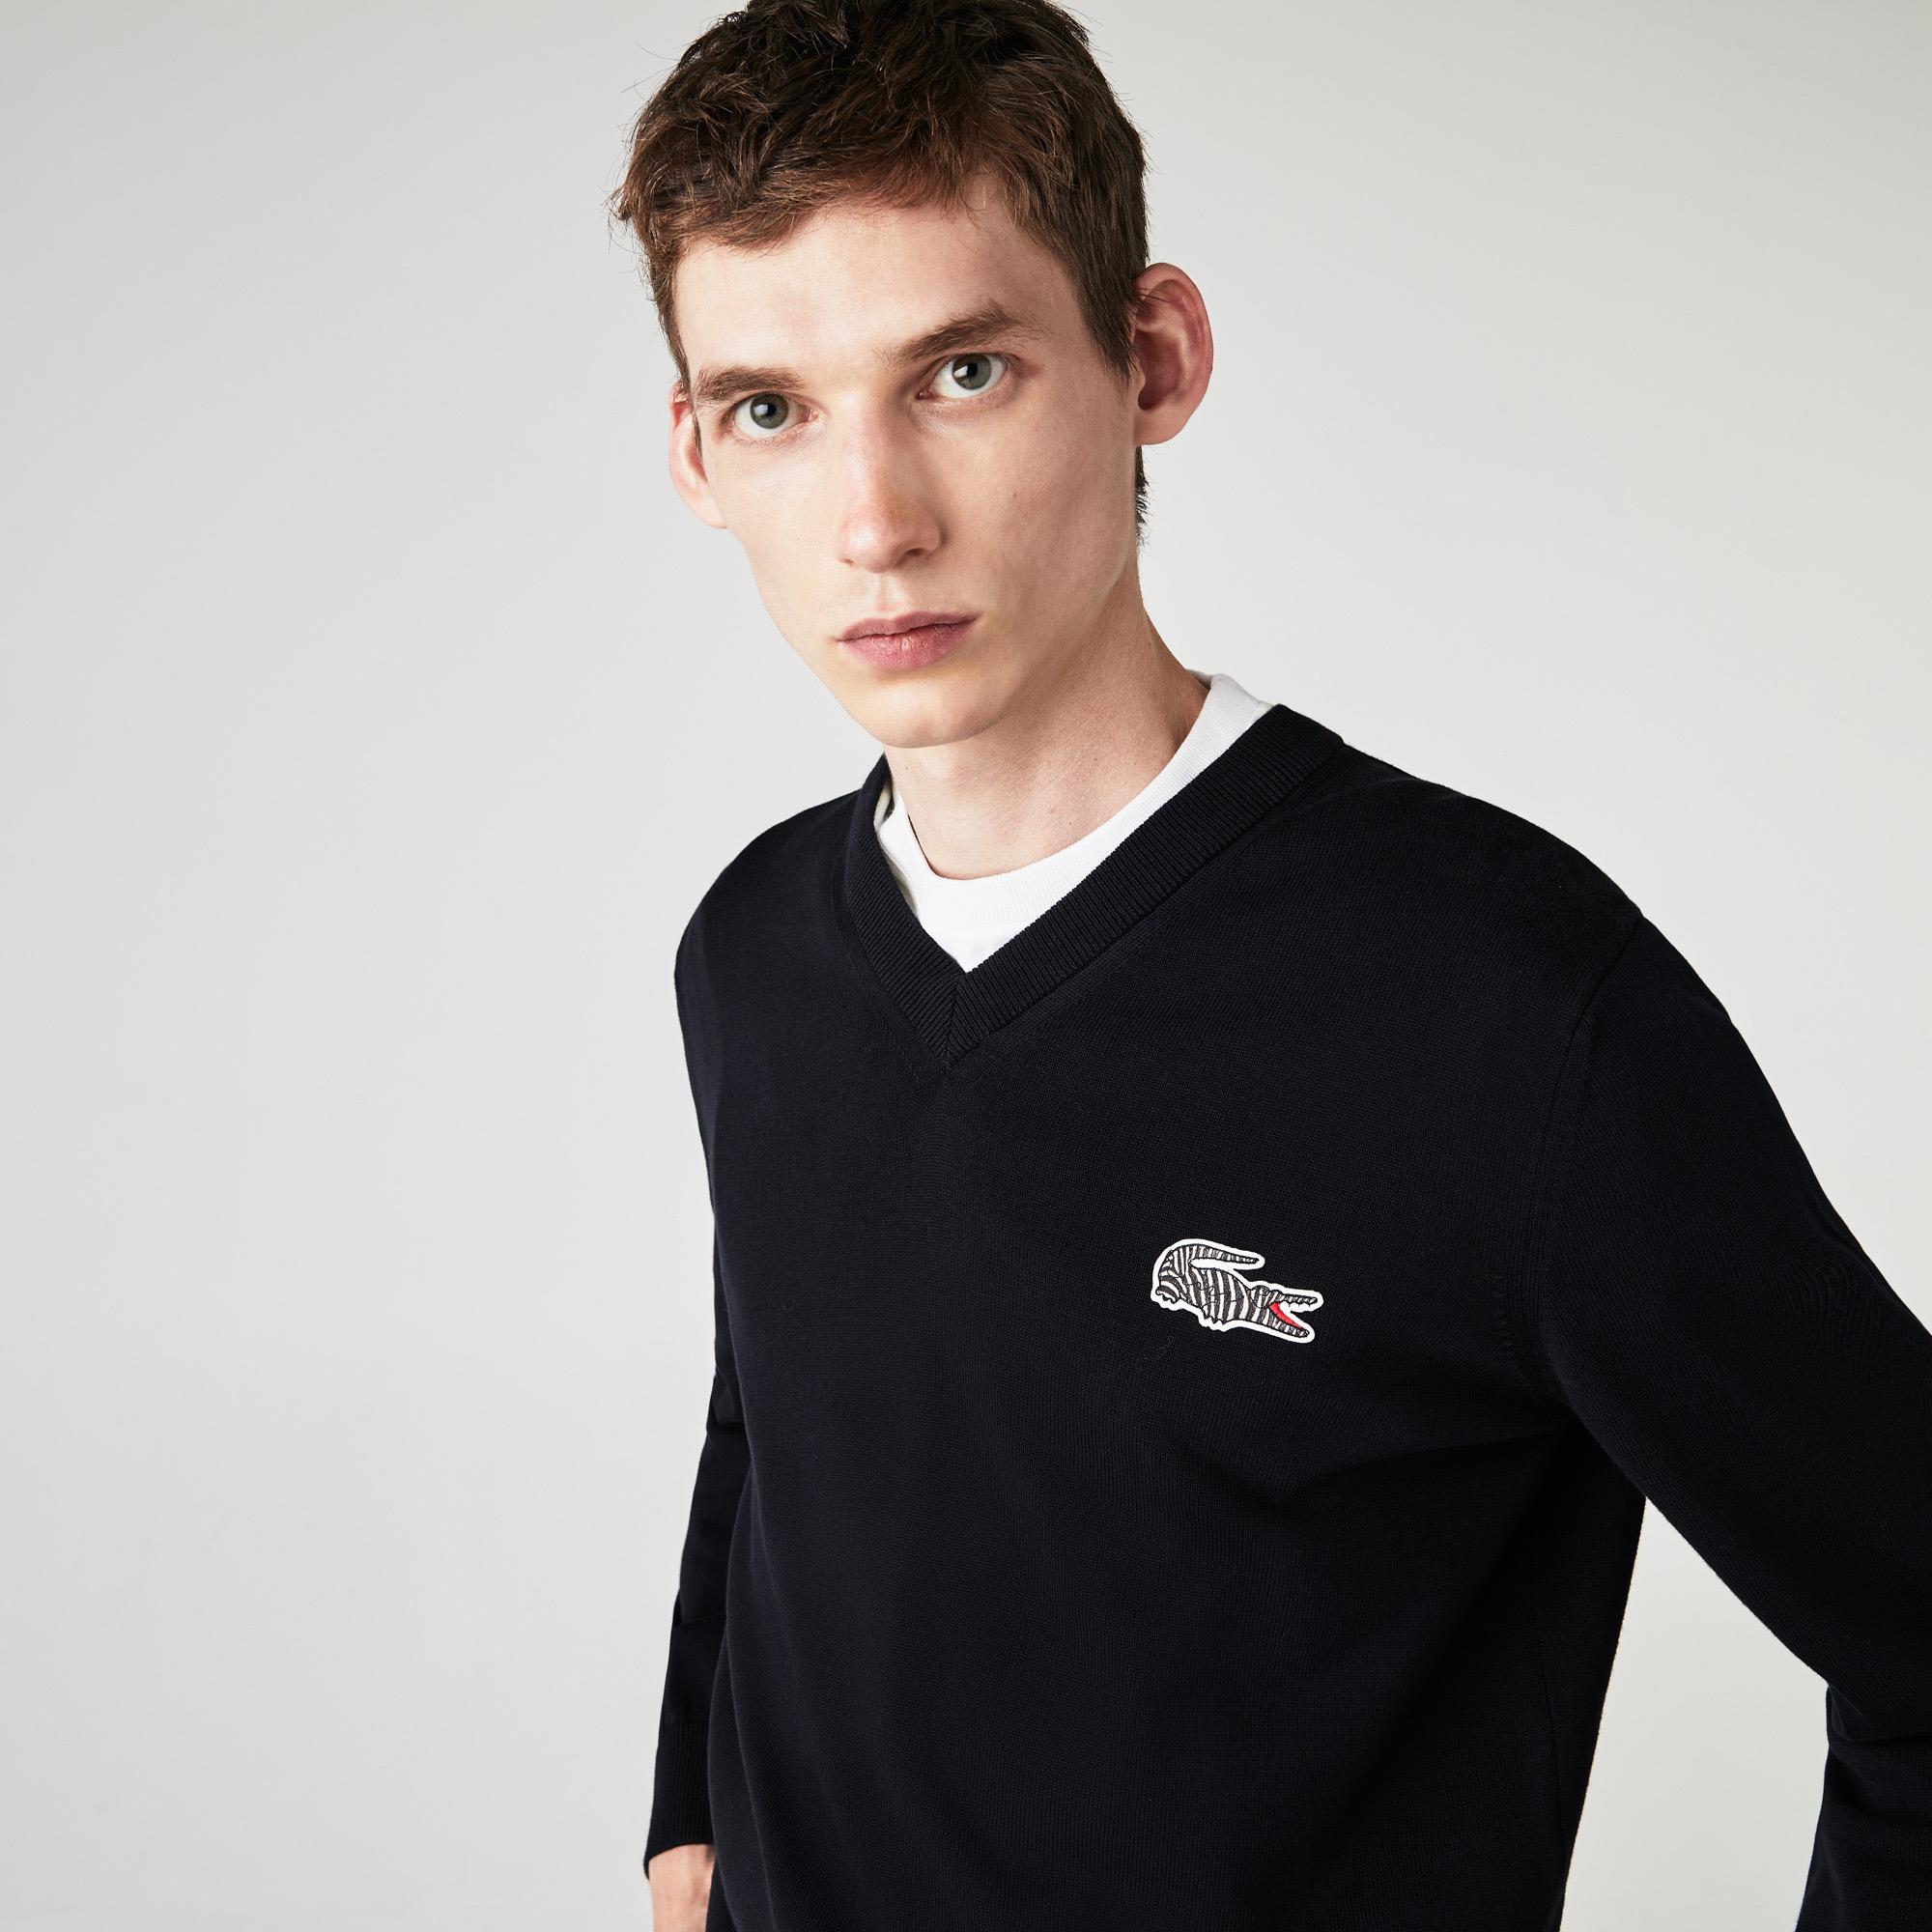 Lacoste x National Geographic Men’s V-neck Cotton Sweater